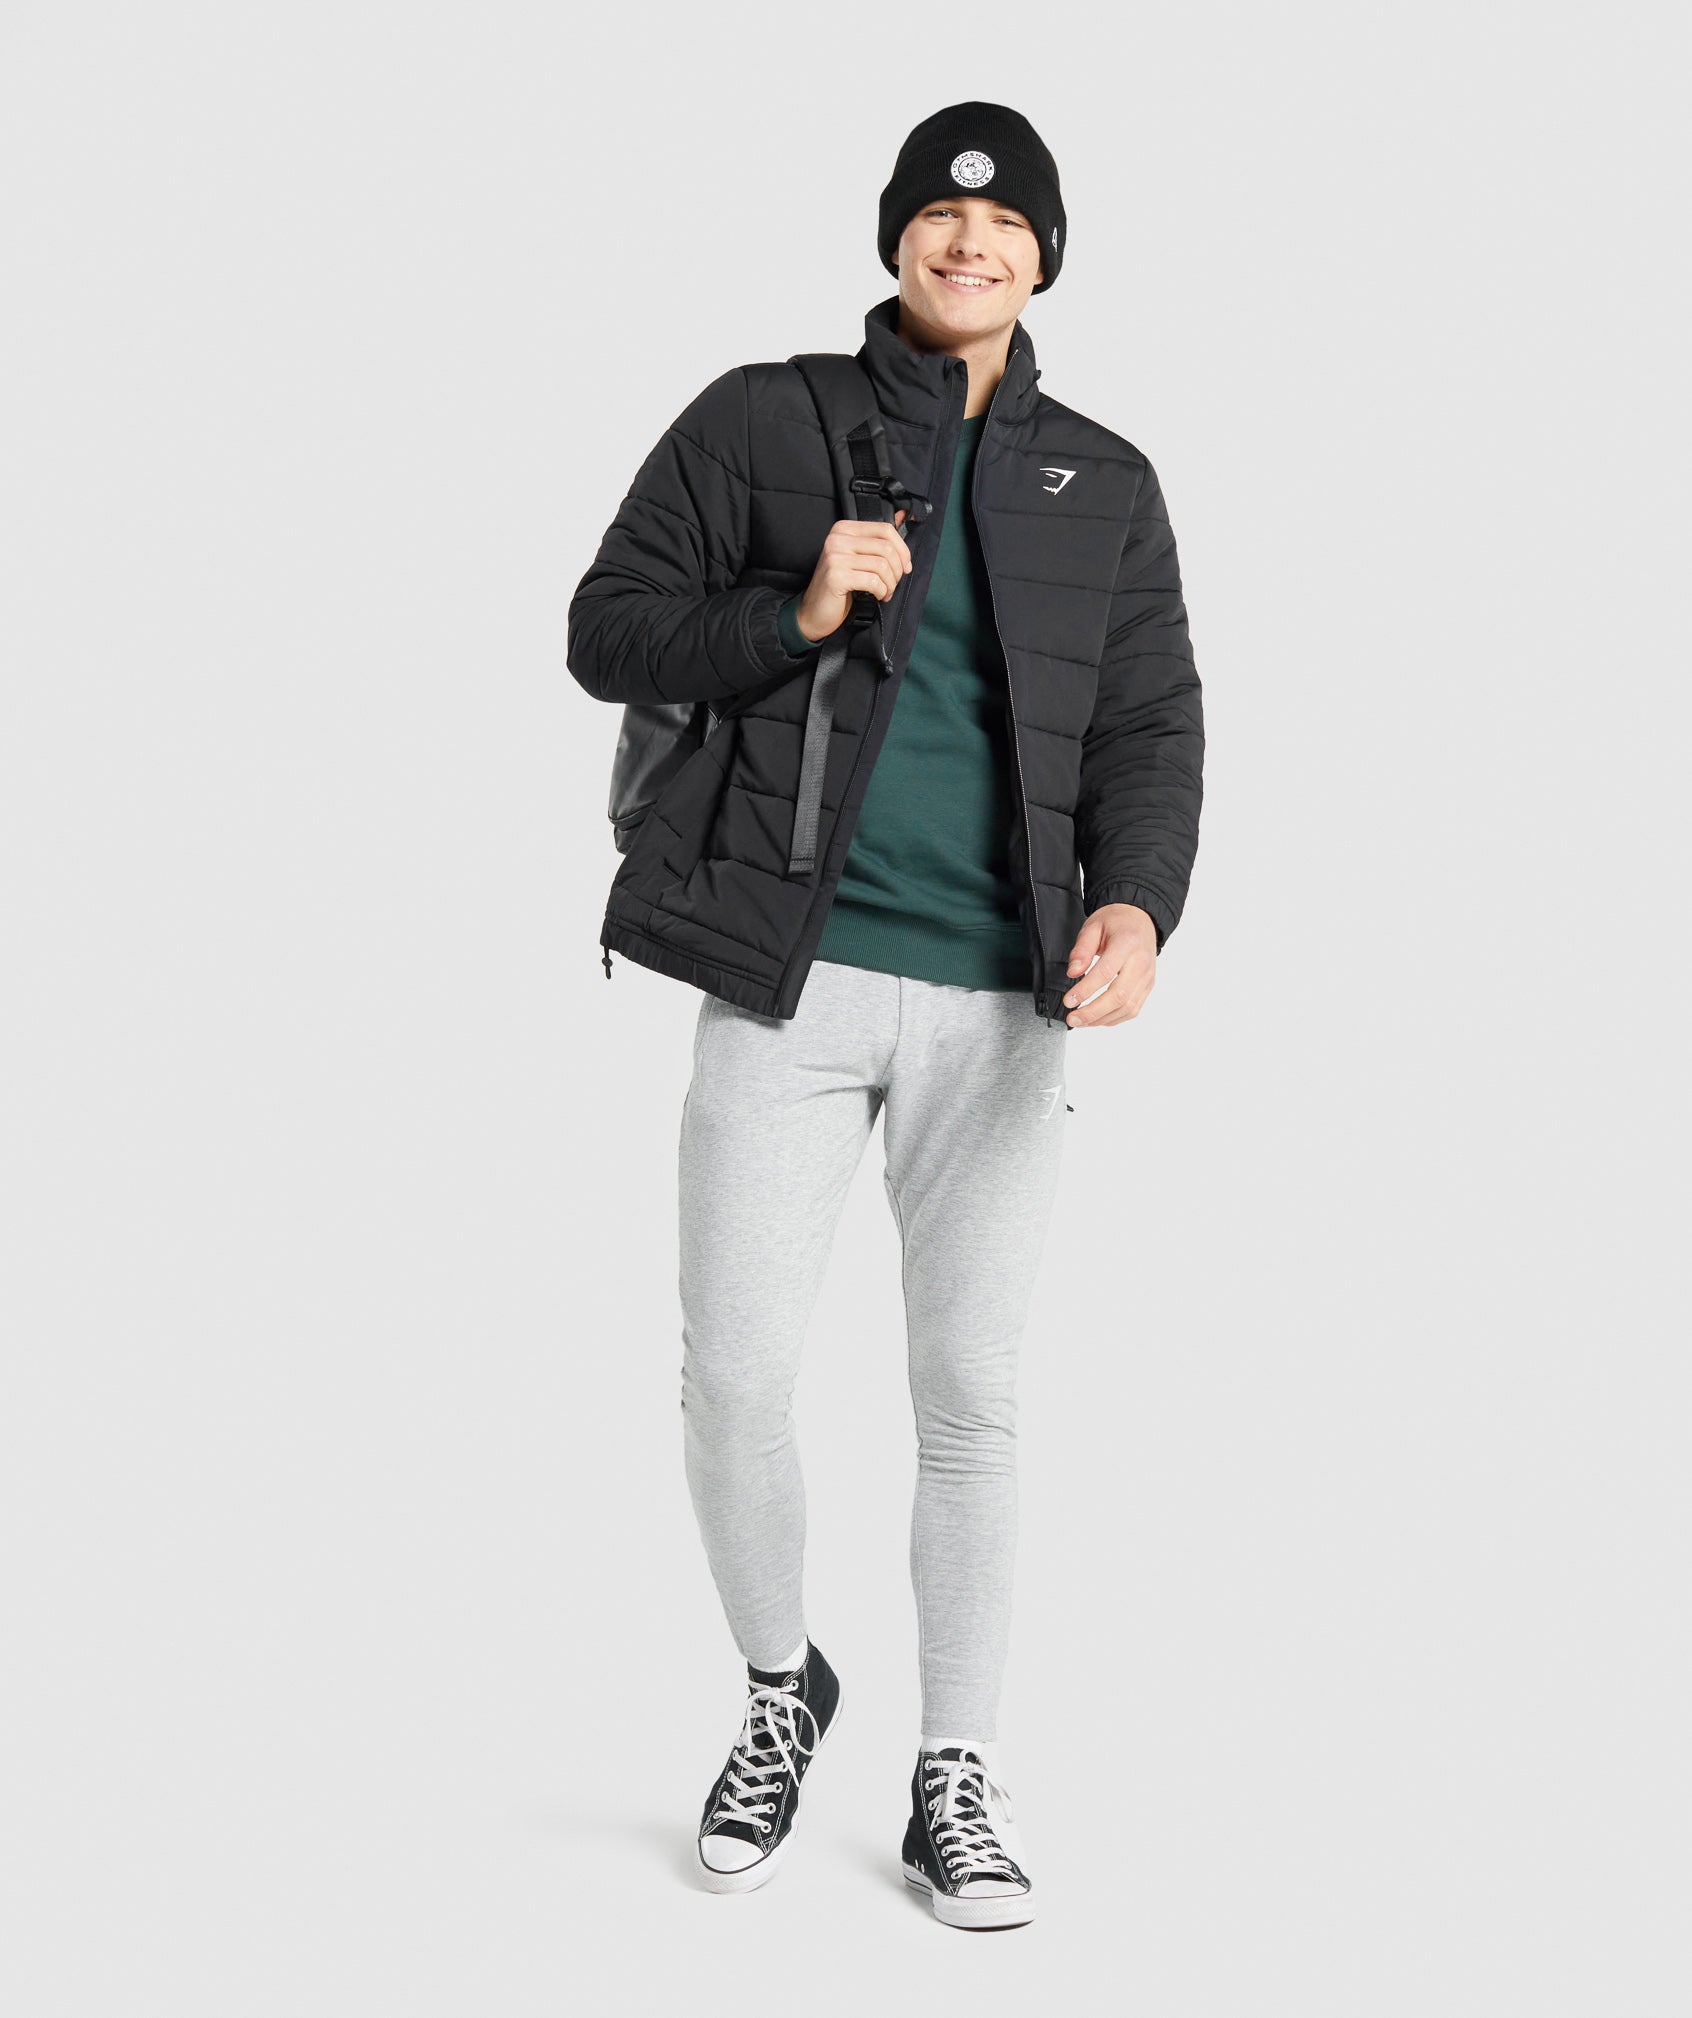 Crest Puffer Jacket in Black - view 5